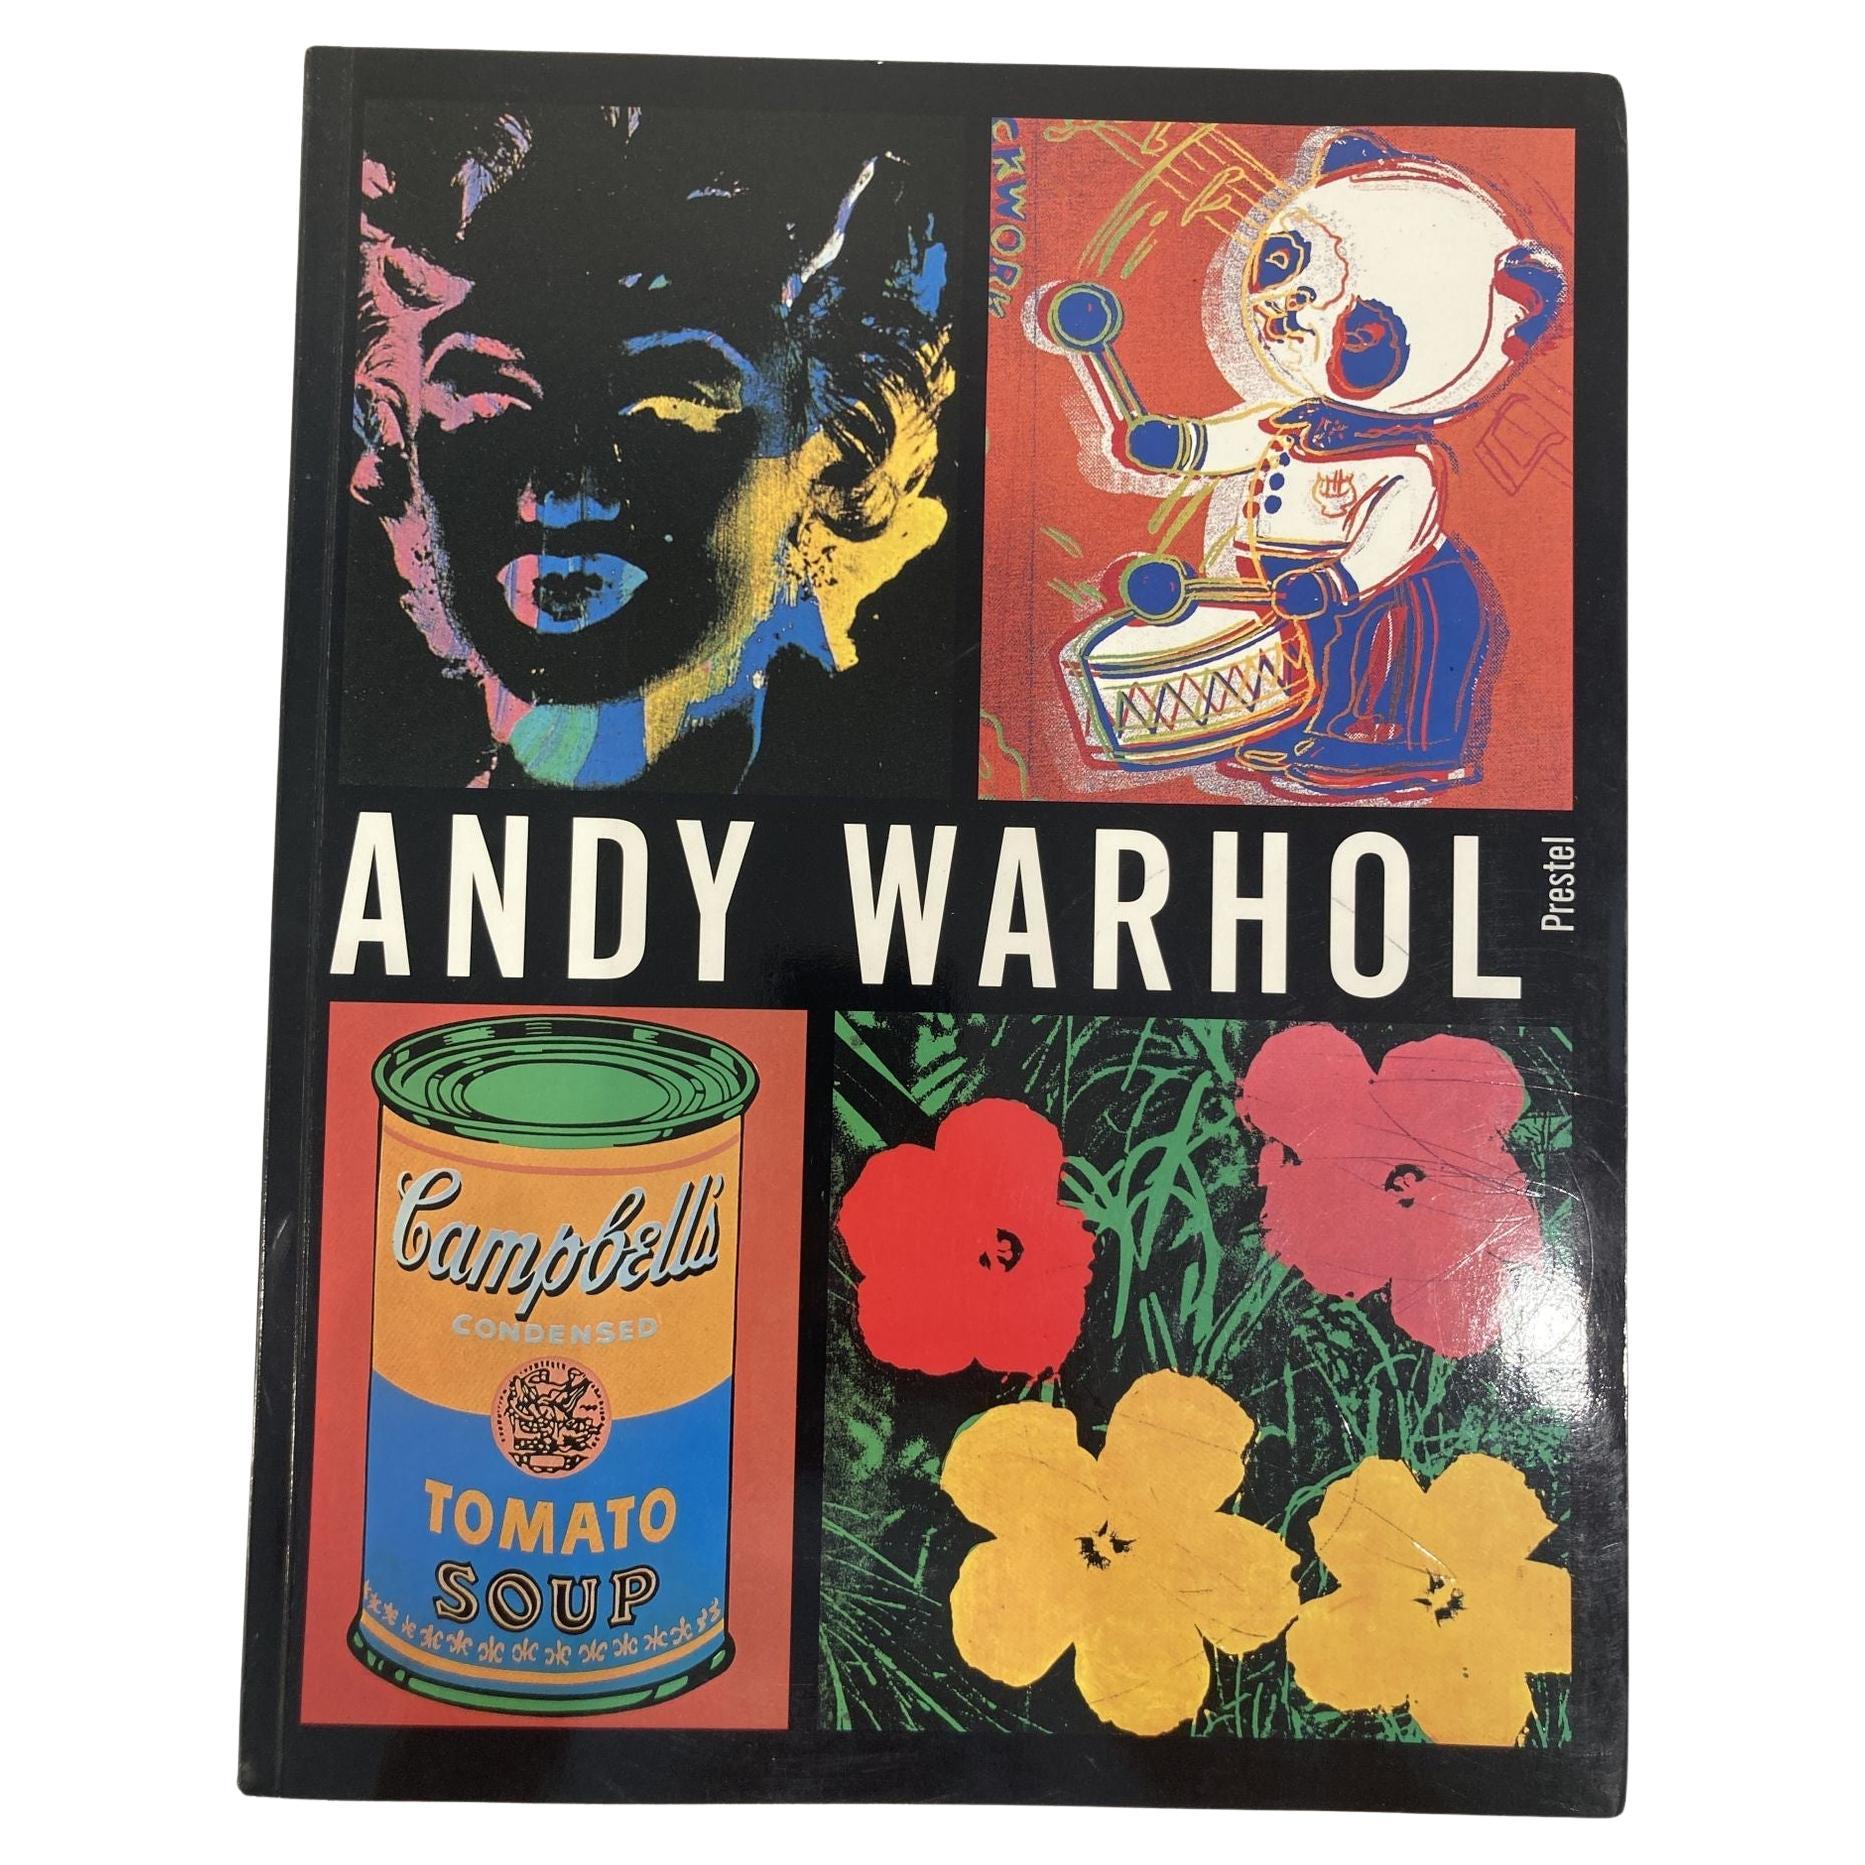 Andy Warhol, 1928-1987: Works from the Collections of José Mugrabi